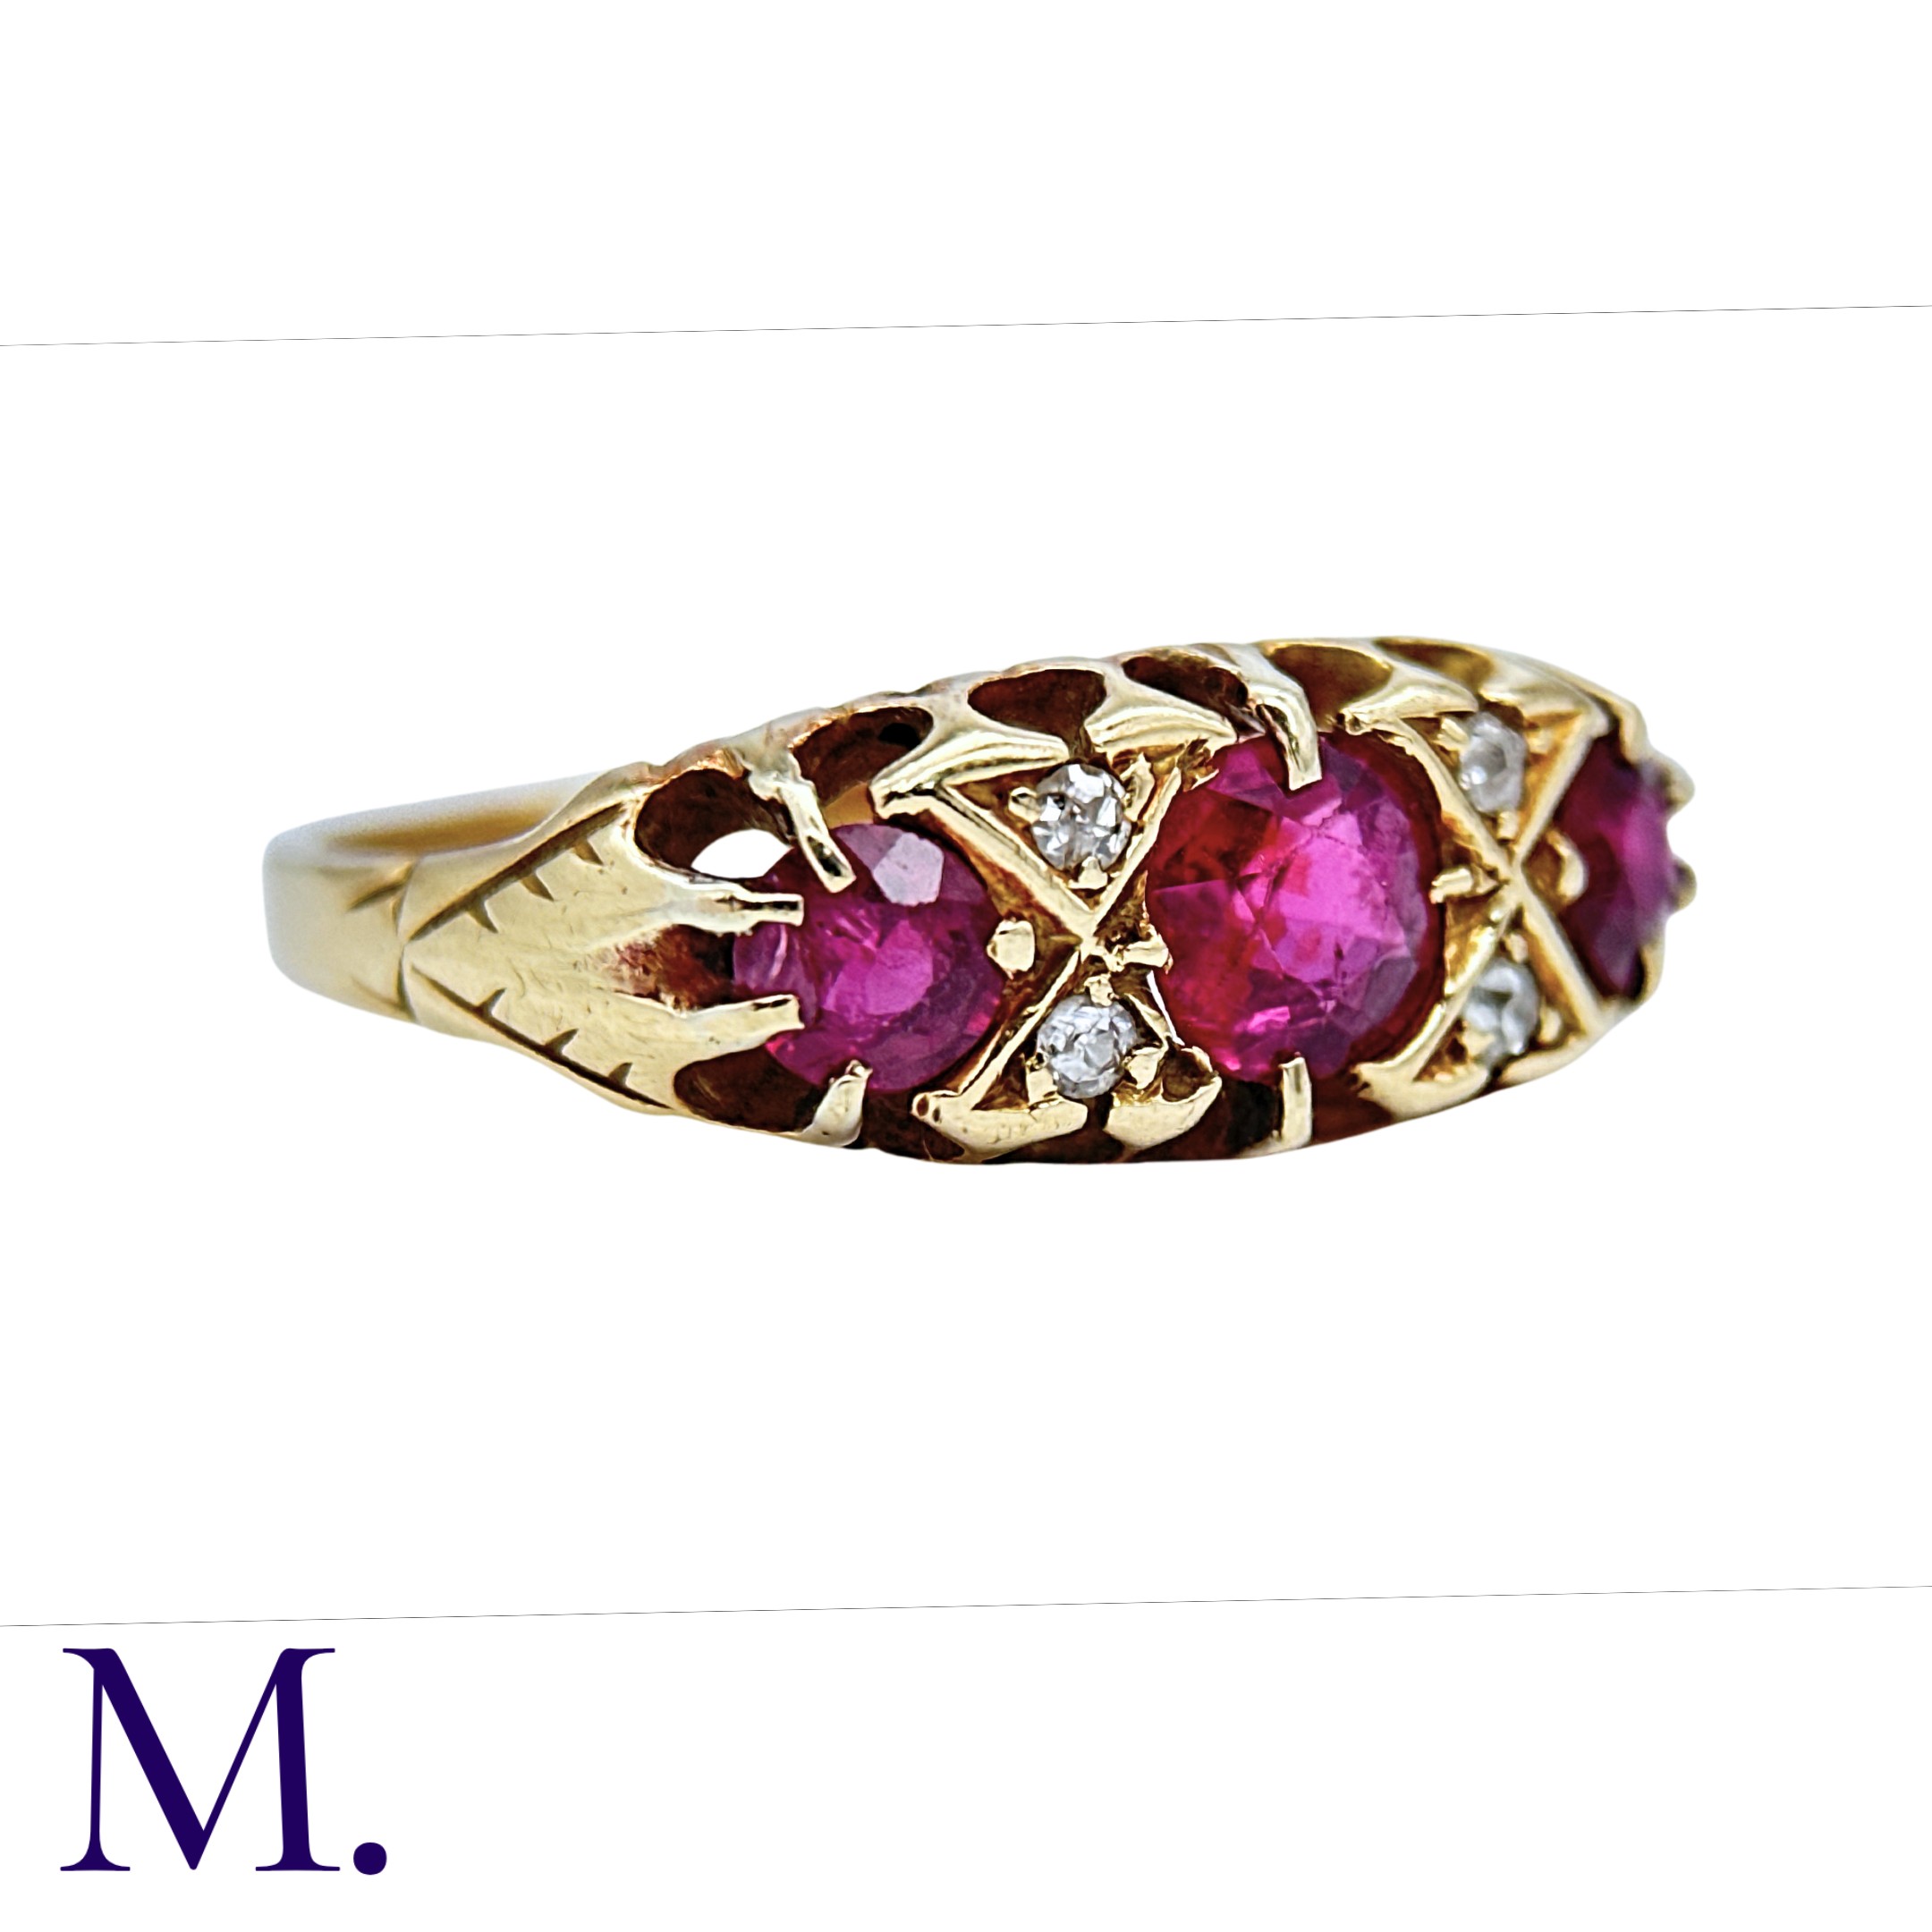 A Red Spinel and Diamond Ring in 18K yellow gold set with three large red spinels and four small - Image 2 of 4